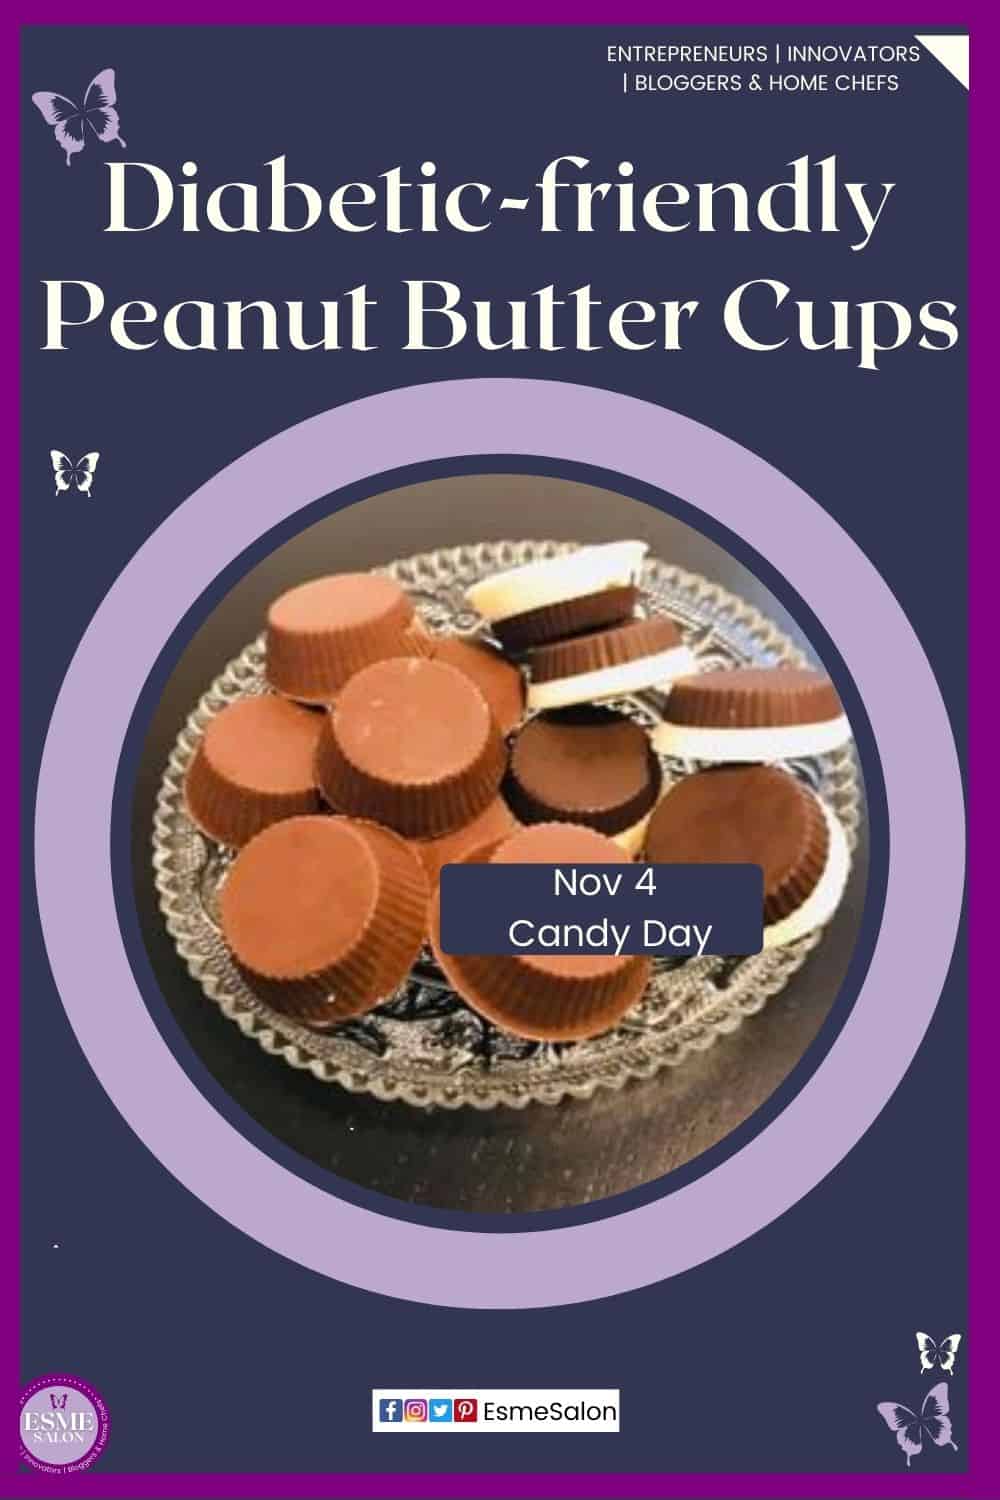 an image of a glass tray filled with Diabetic-Friendly Peanut Butter Cups